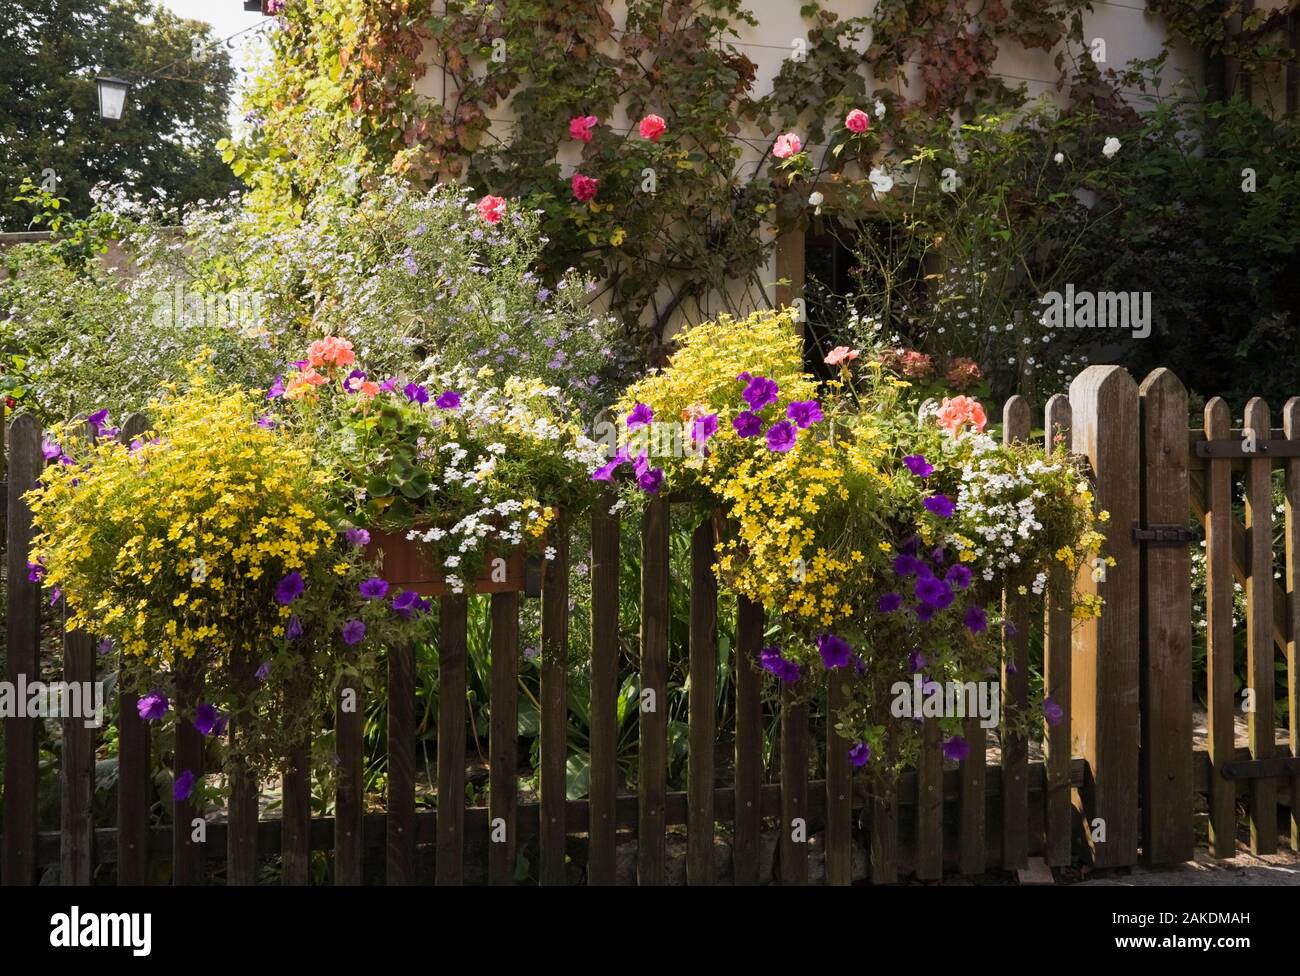 Old wooden picket fence in front yard garden decorated with flower boxes of yellow Bidens, white Bacopa - Water Hyssop and purple Petunias. Stock Photo